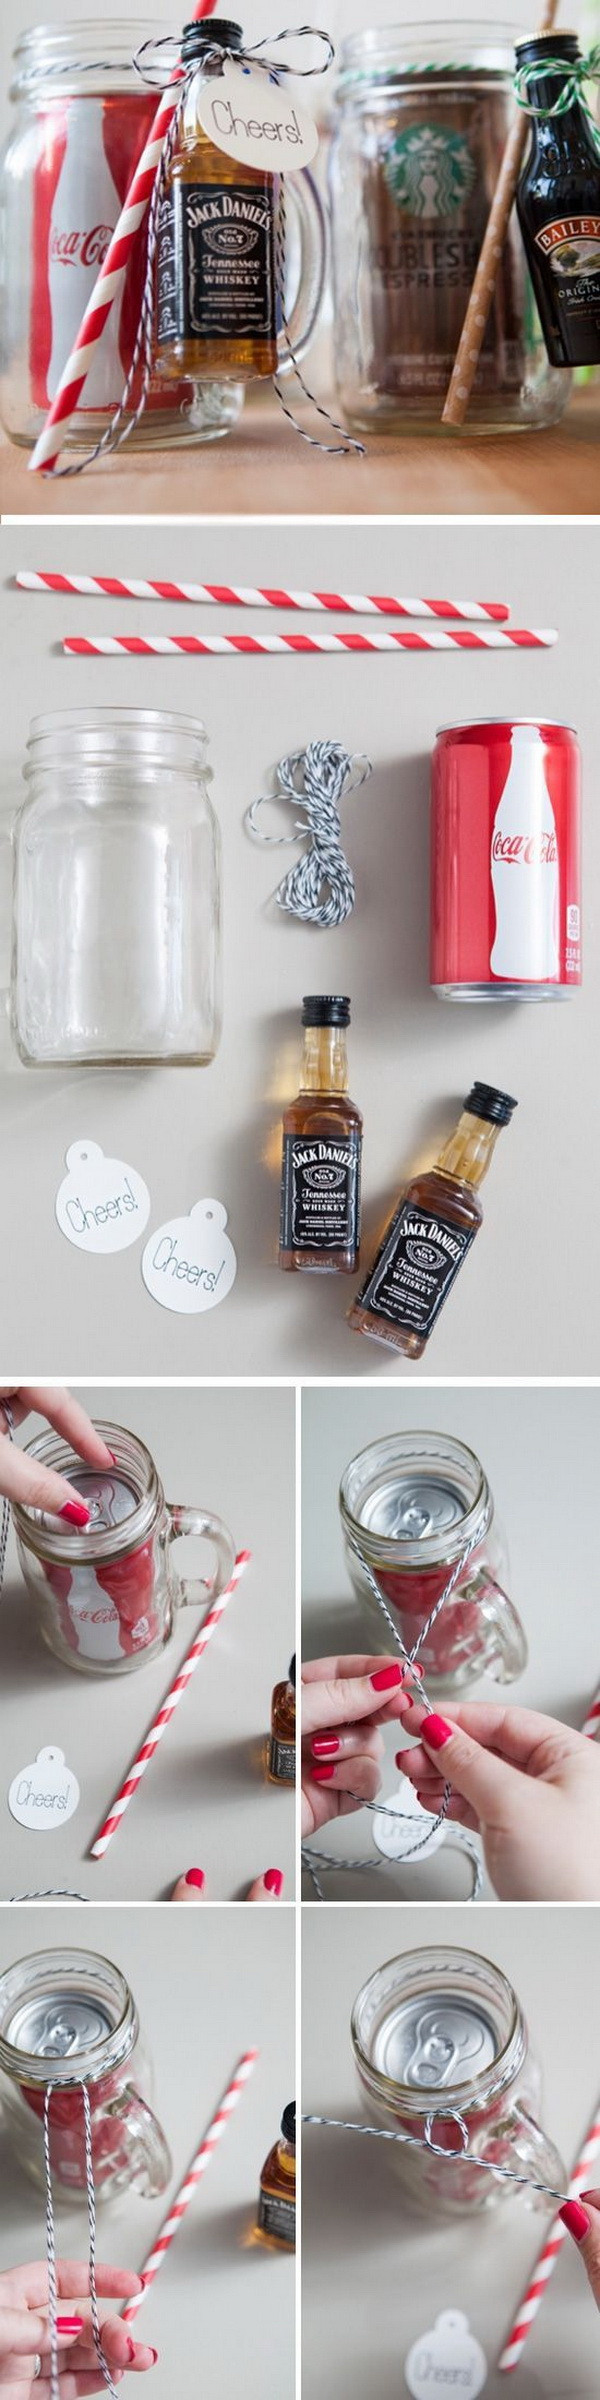 Valentine Gift Ideas For Father
 25 Great DIY Gift Ideas for Dad This Holiday For